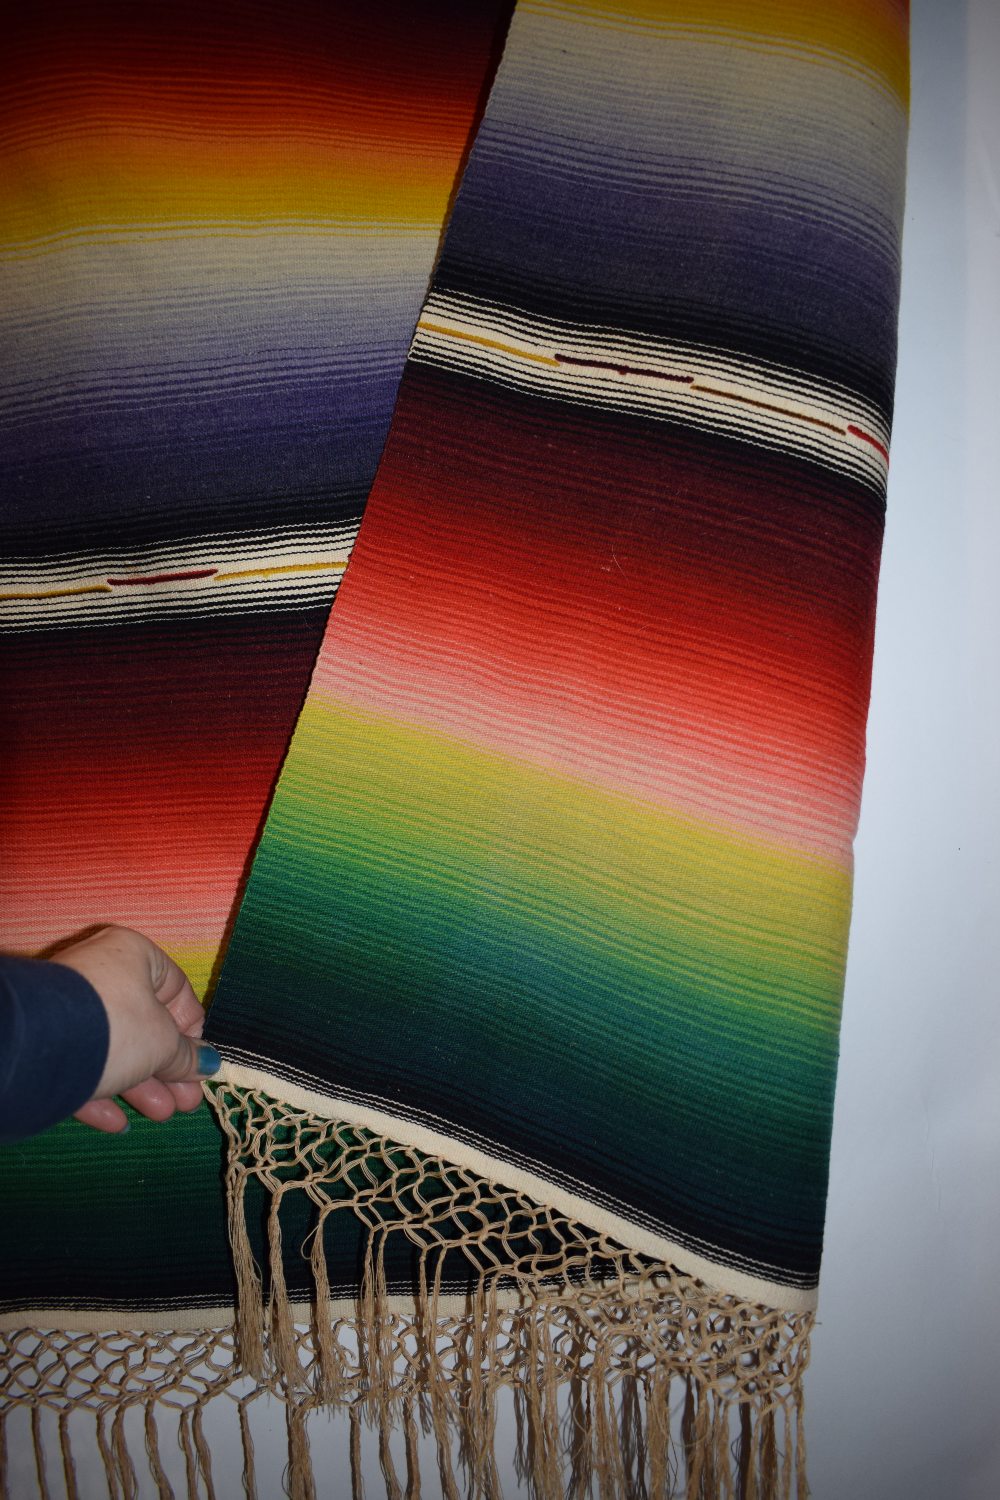 Mexican serape blanket, north America, mid-20th century, 68in. X 32in. 1.73m. X 0.81m. Woven in - Image 7 of 7